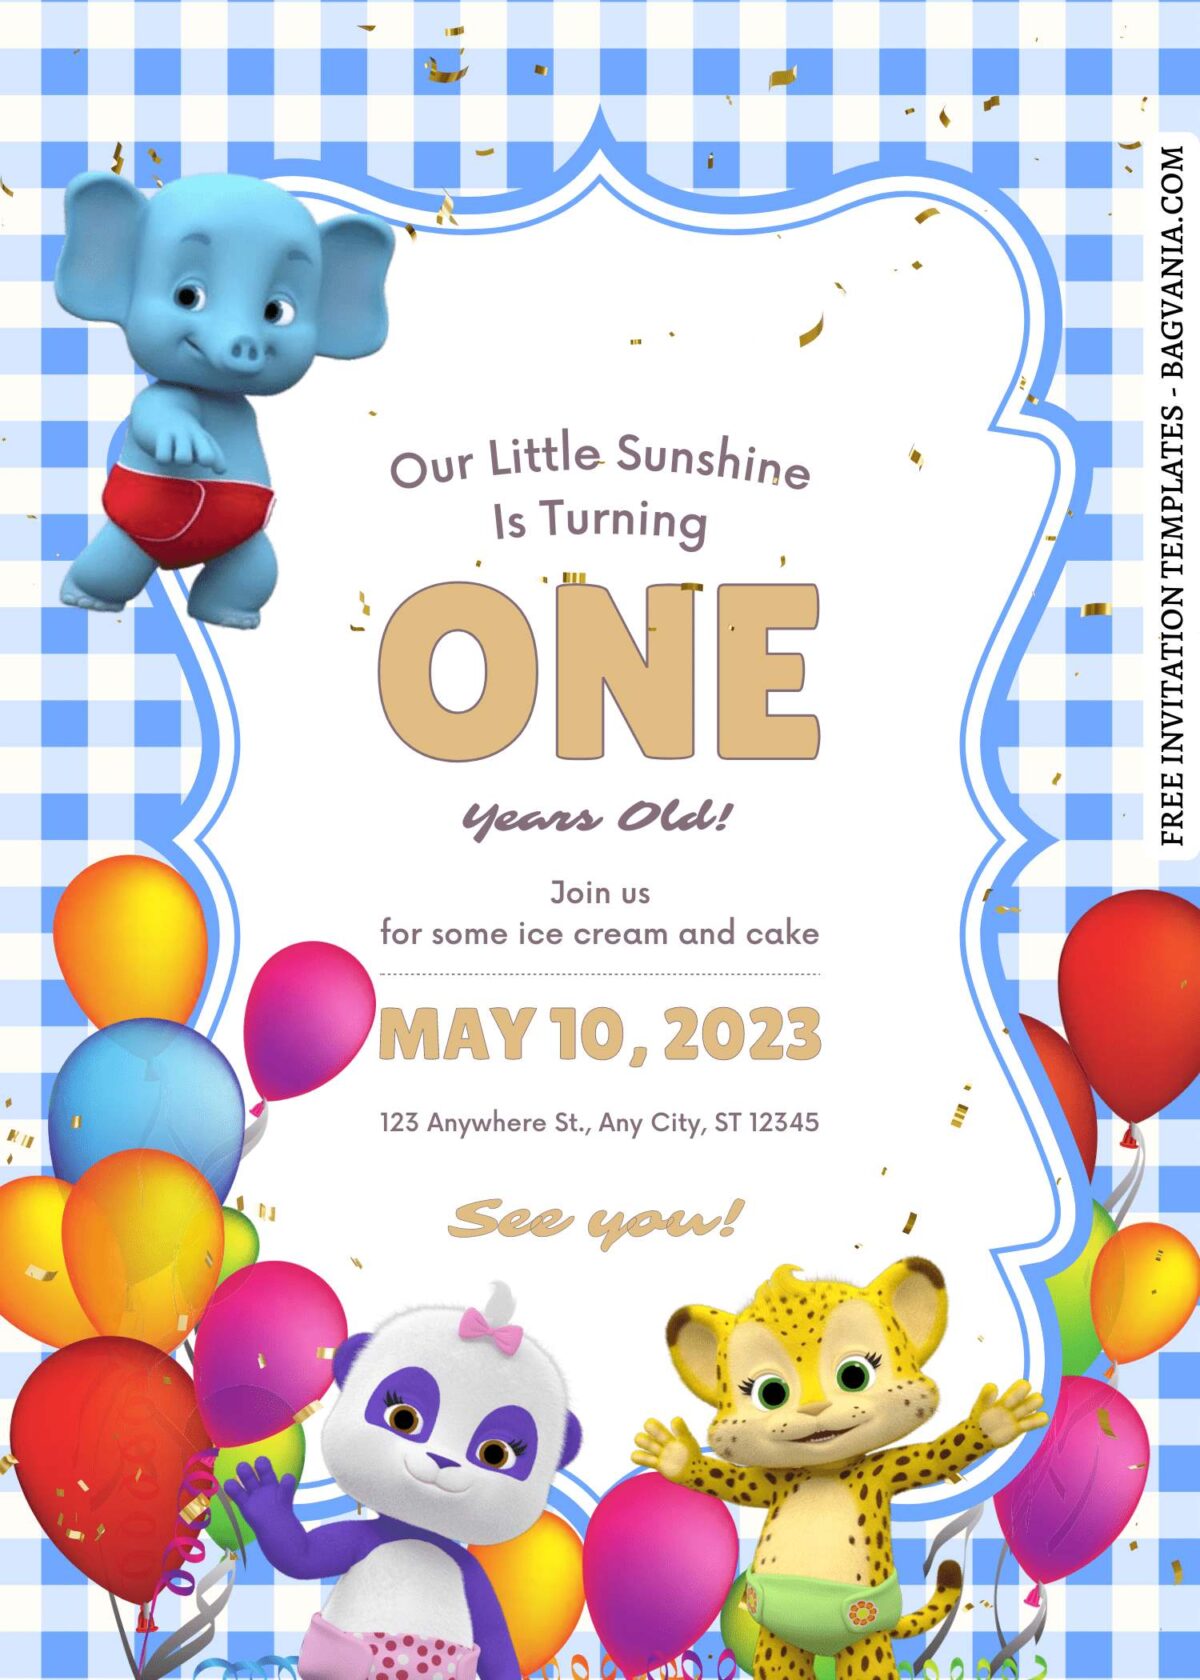 FREE EDITABLE - 11+ Festive Word Party Canva Birthday Invitation Templates with cute Tiger cub